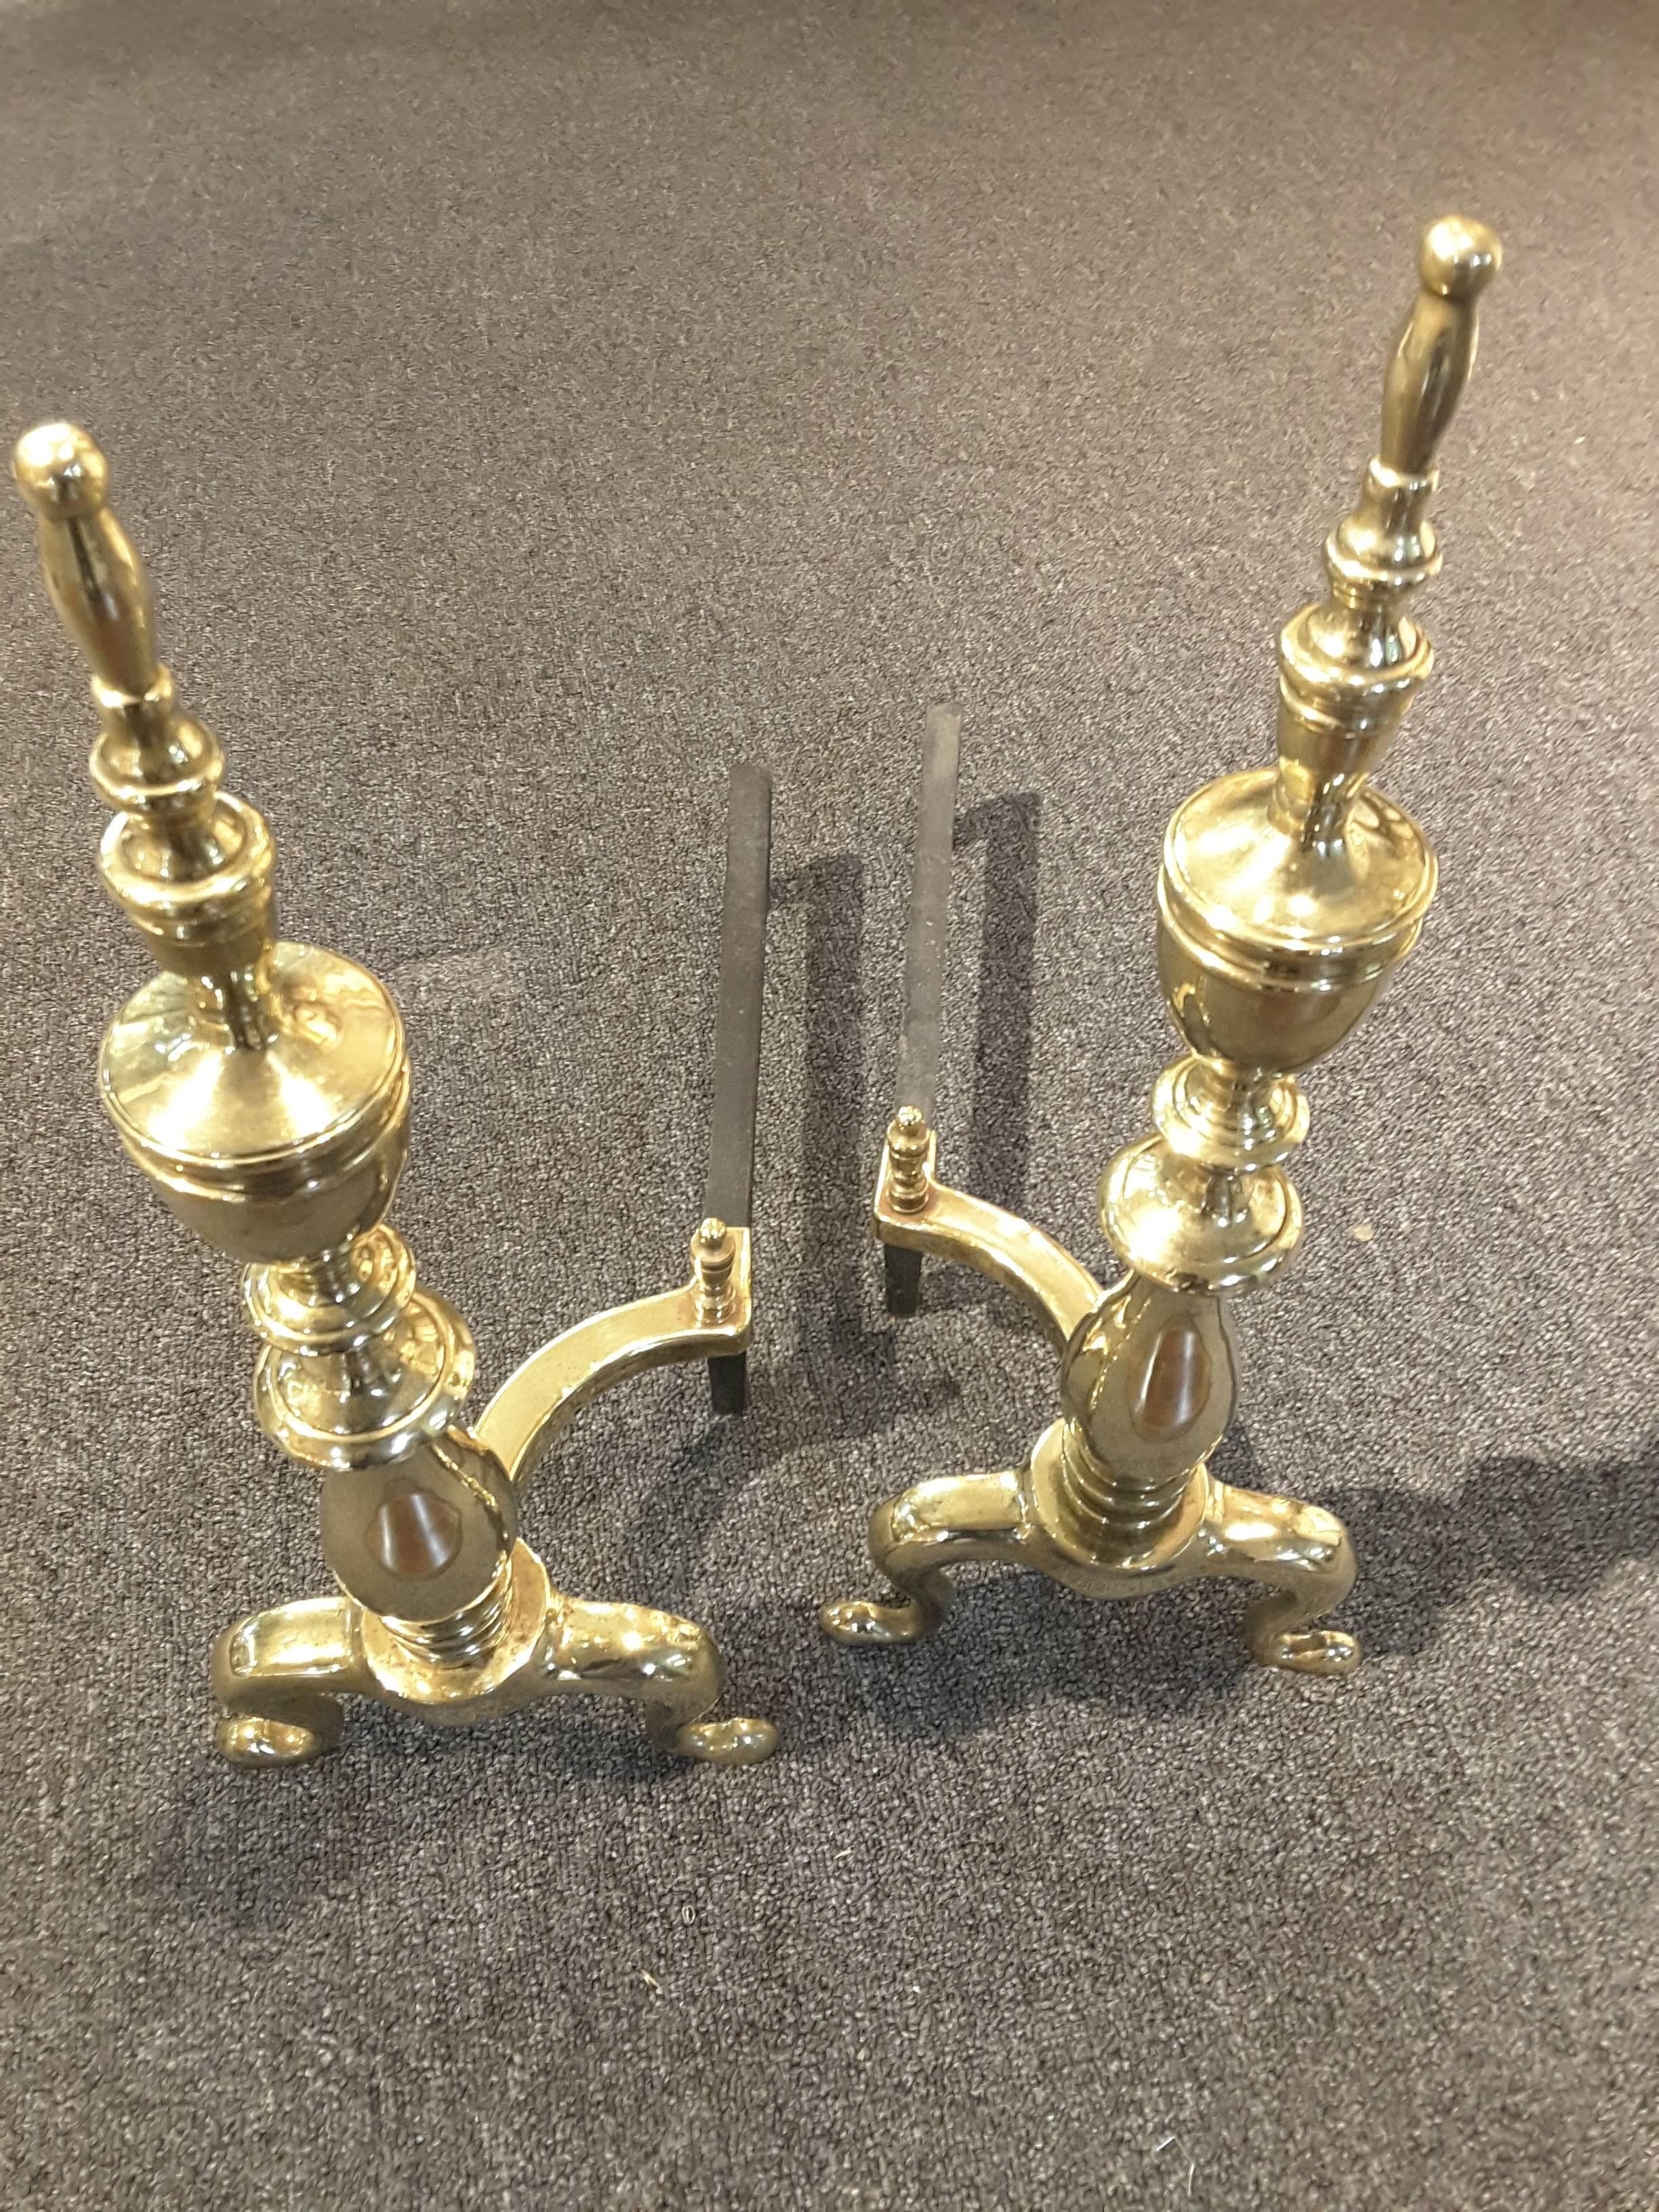 Pair of Late 19th Century Solid Brass Andirons with Log Stops For Sale 3